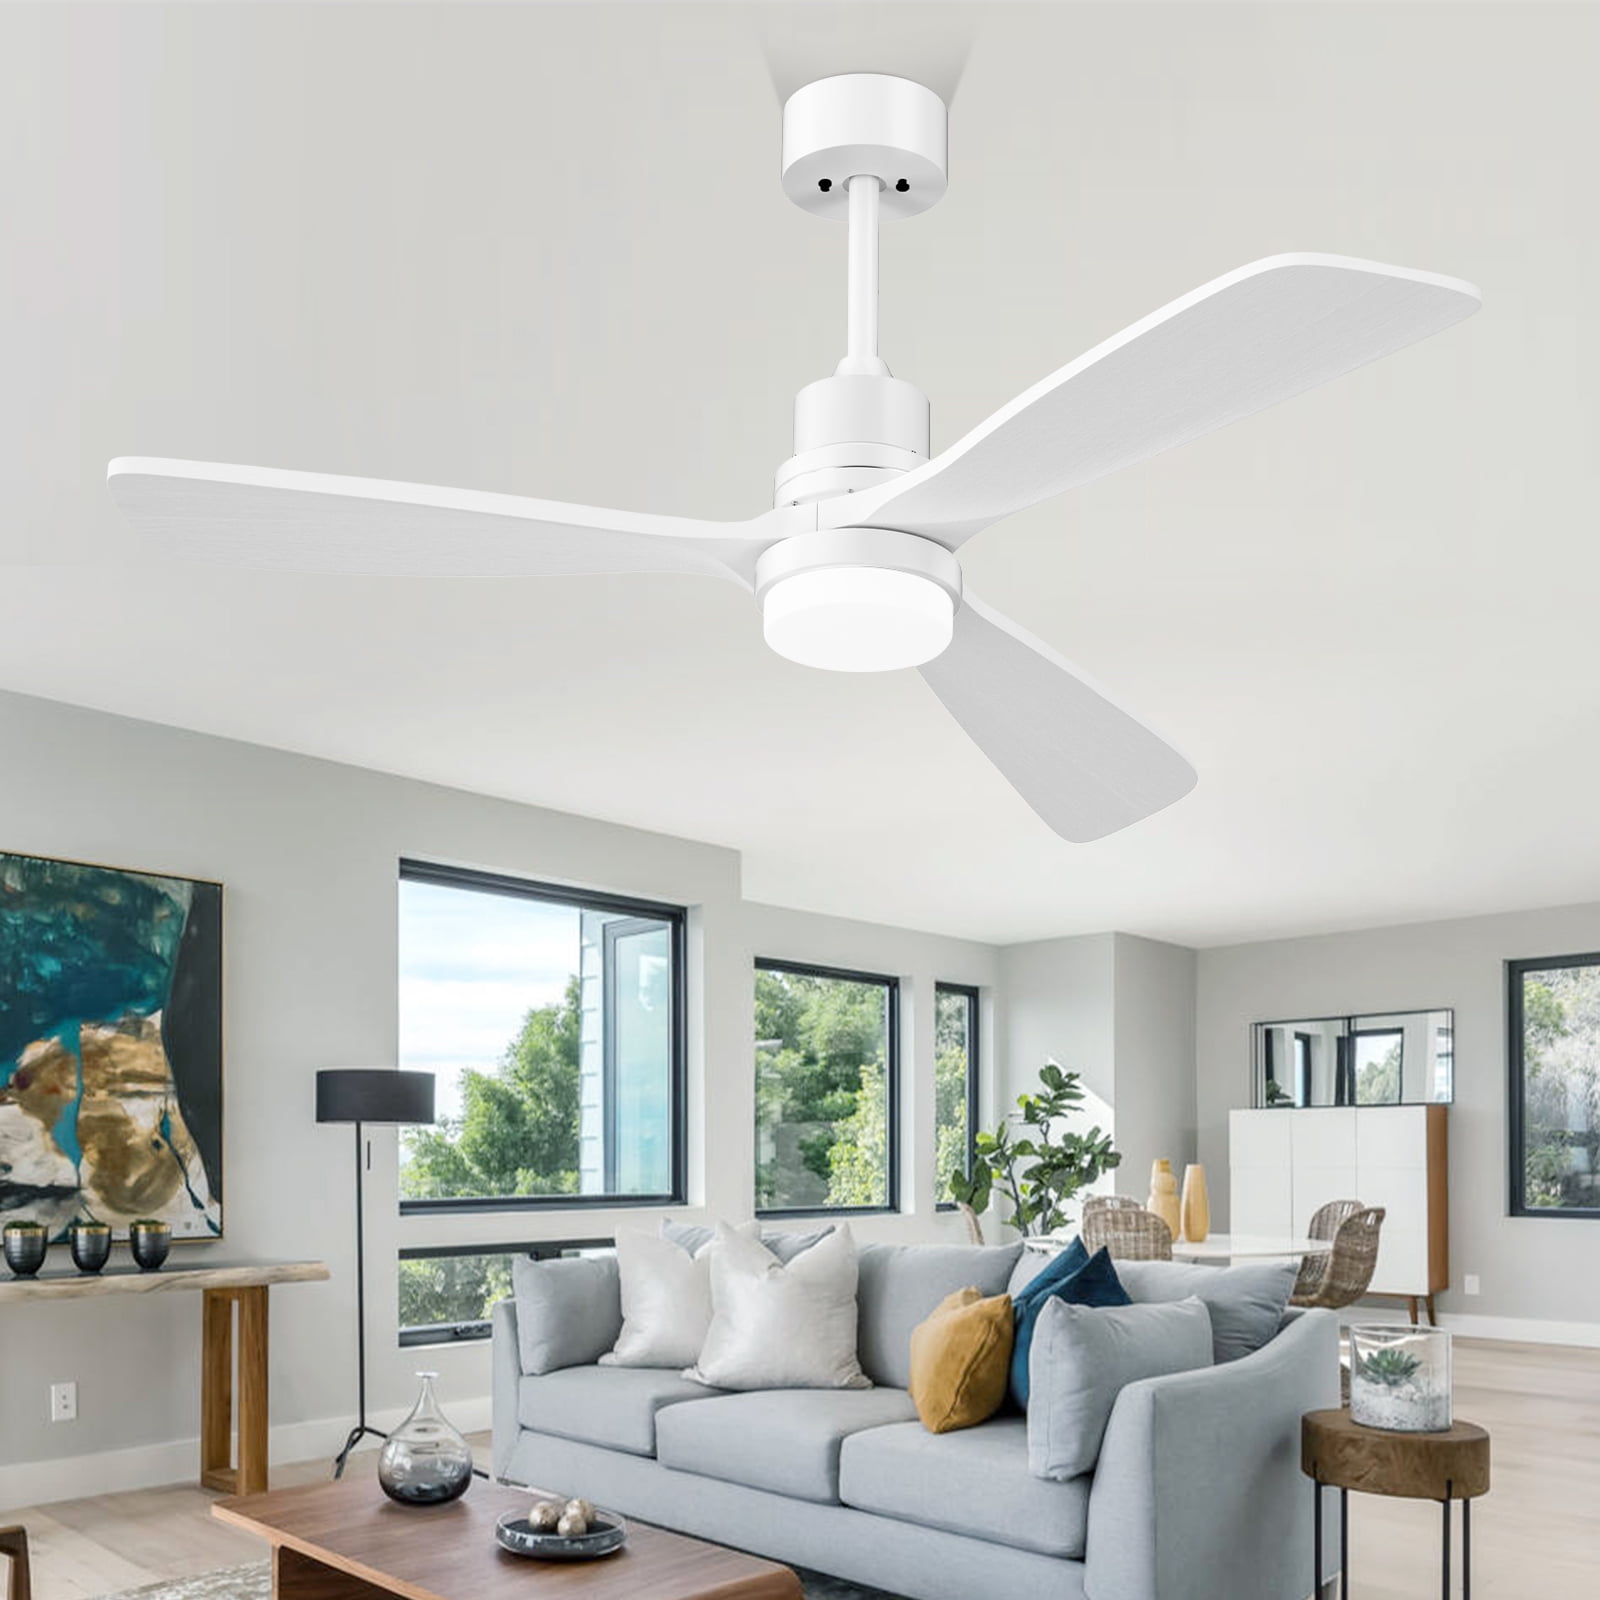 Xaujix 52 Ceiling Fan With Light And